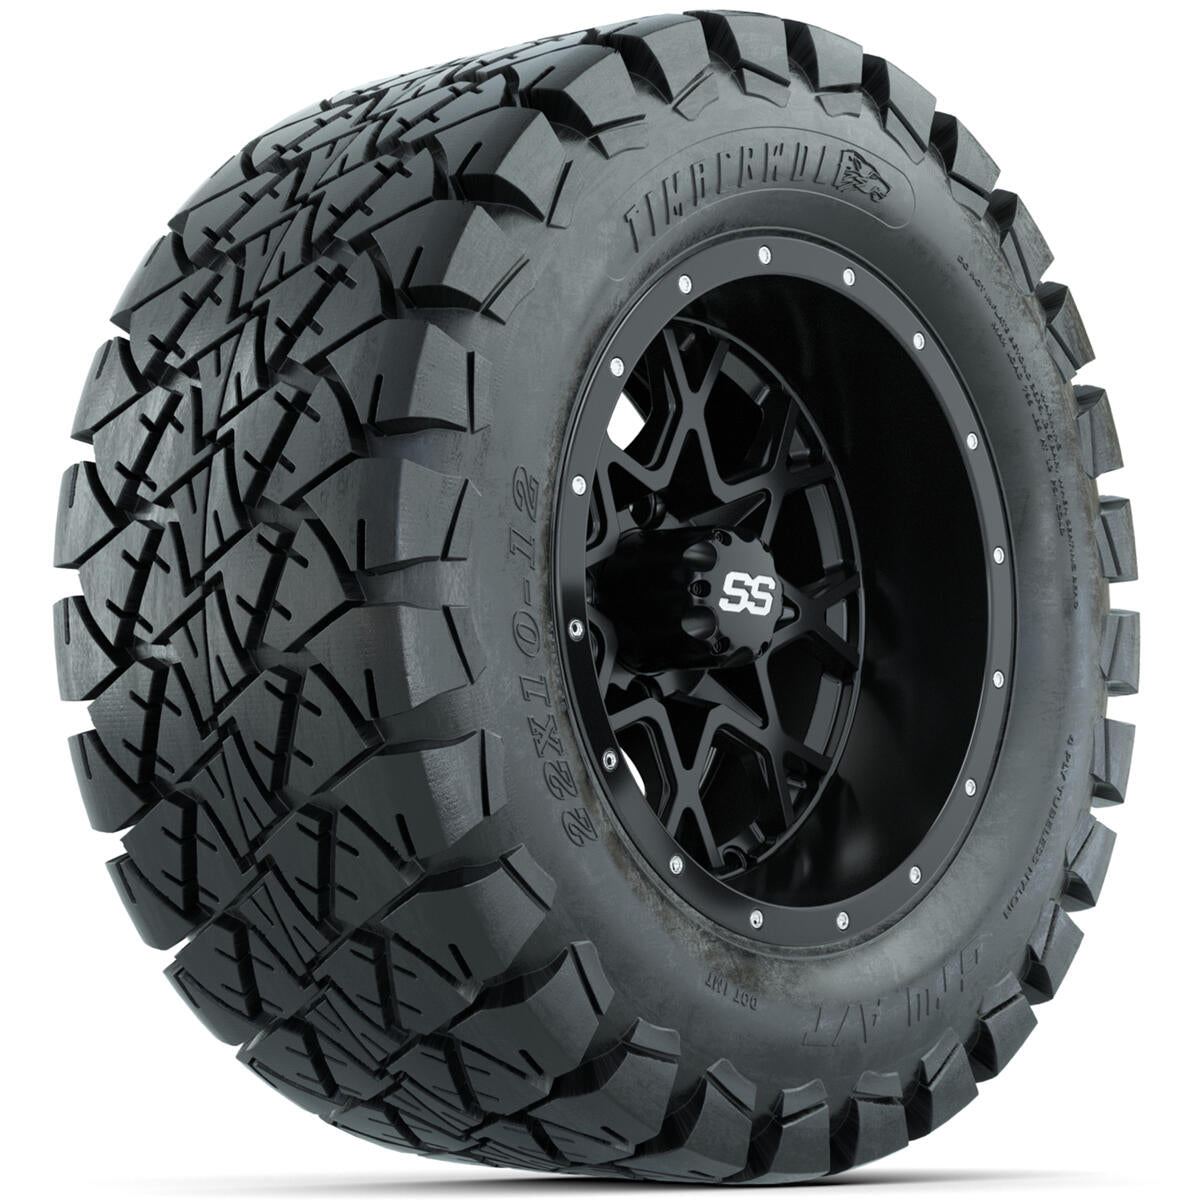 Set of 4 12"in GTW Vortex Wheels with 22x10-12"GTW Timberwolf All-Terrain Tires A19-690